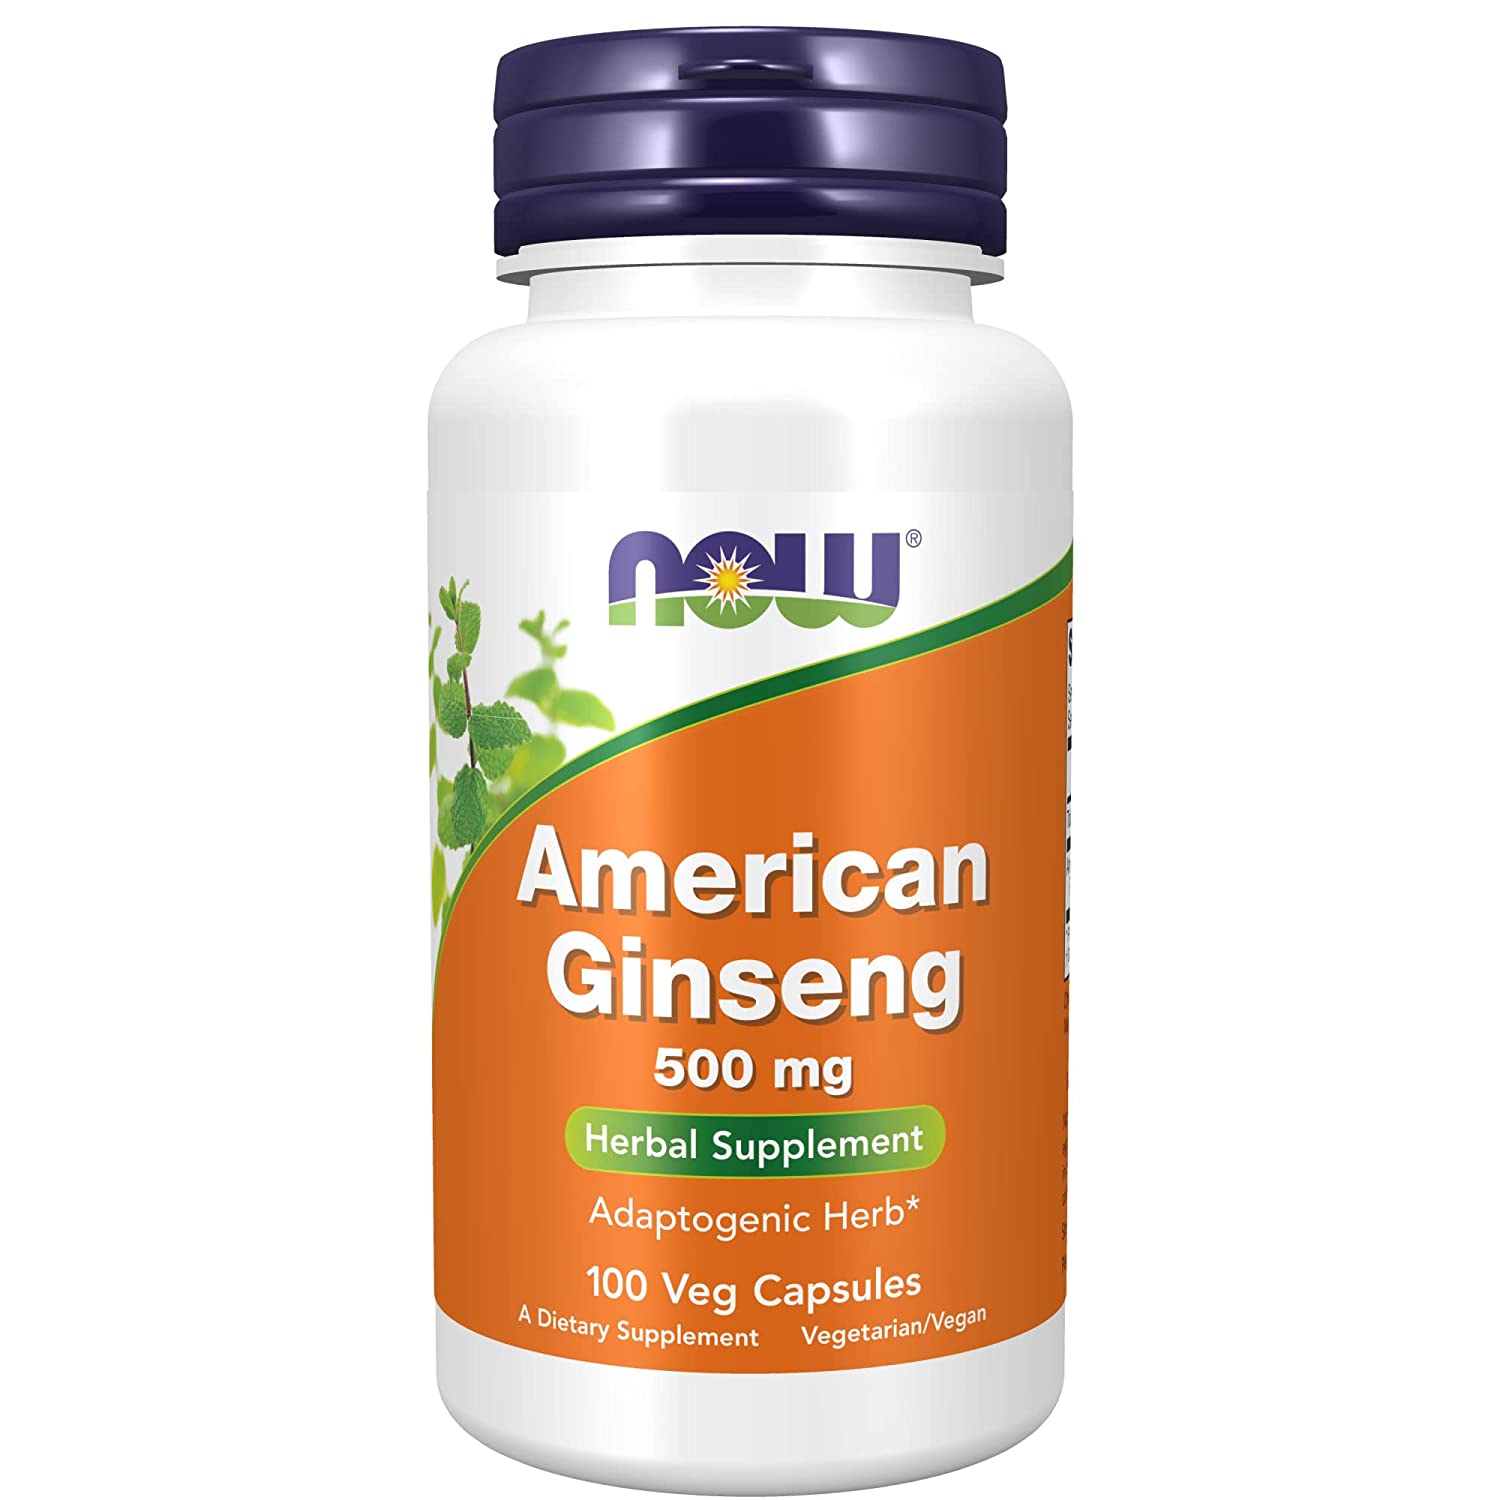 NOW Foods American Ginseng, 500 mg, 100 Veg Capsules